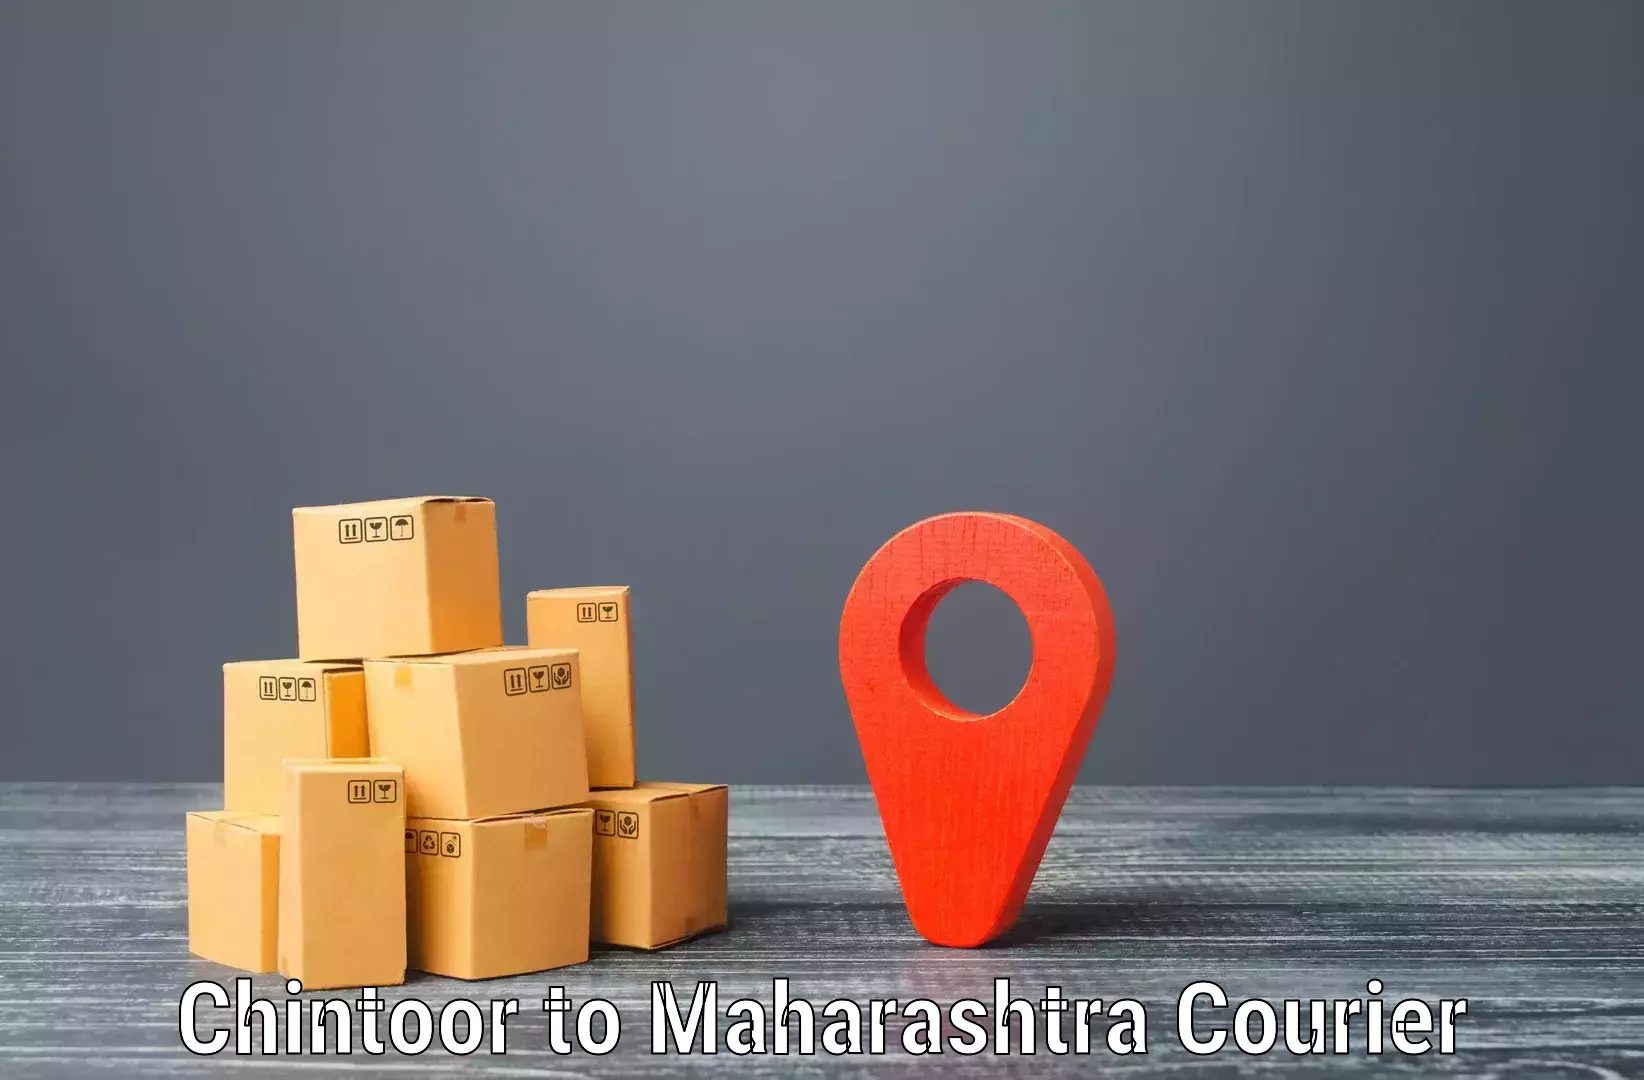 Express delivery network Chintoor to Nandura